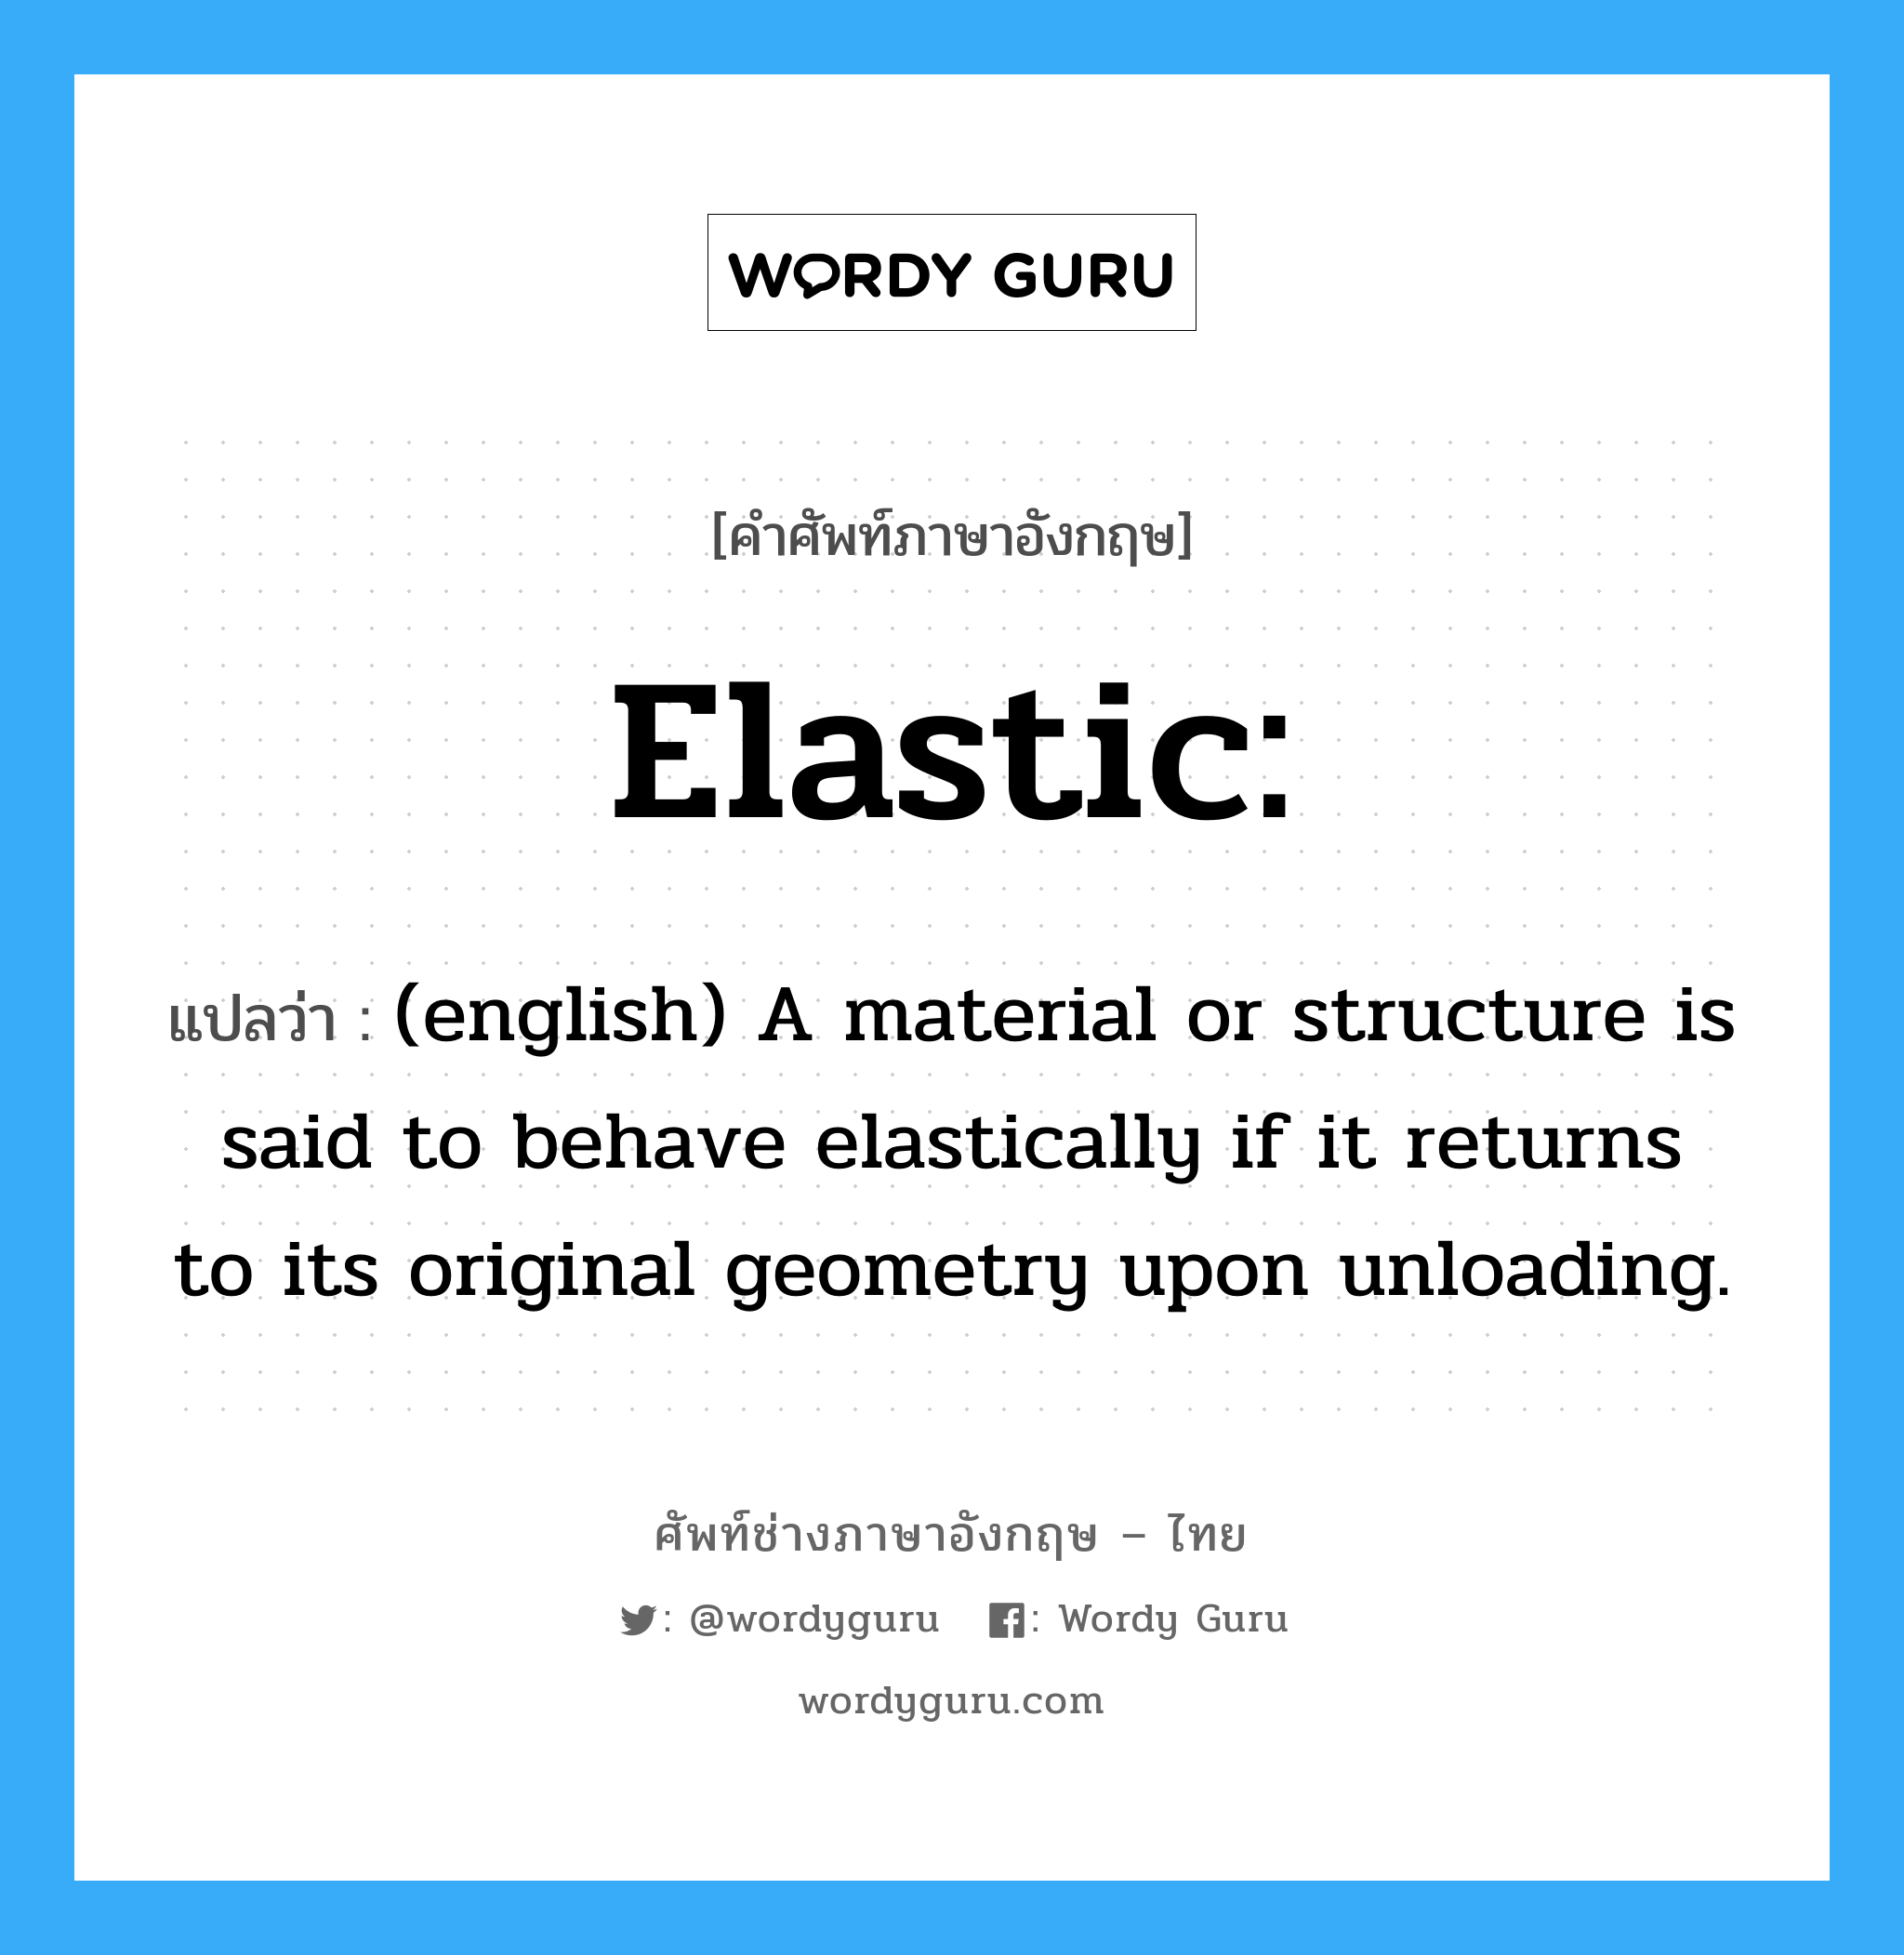 Elastic: แปลว่า?, คำศัพท์ช่างภาษาอังกฤษ - ไทย Elastic: คำศัพท์ภาษาอังกฤษ Elastic: แปลว่า (english) A material or structure is said to behave elastically if it returns to its original geometry upon unloading.